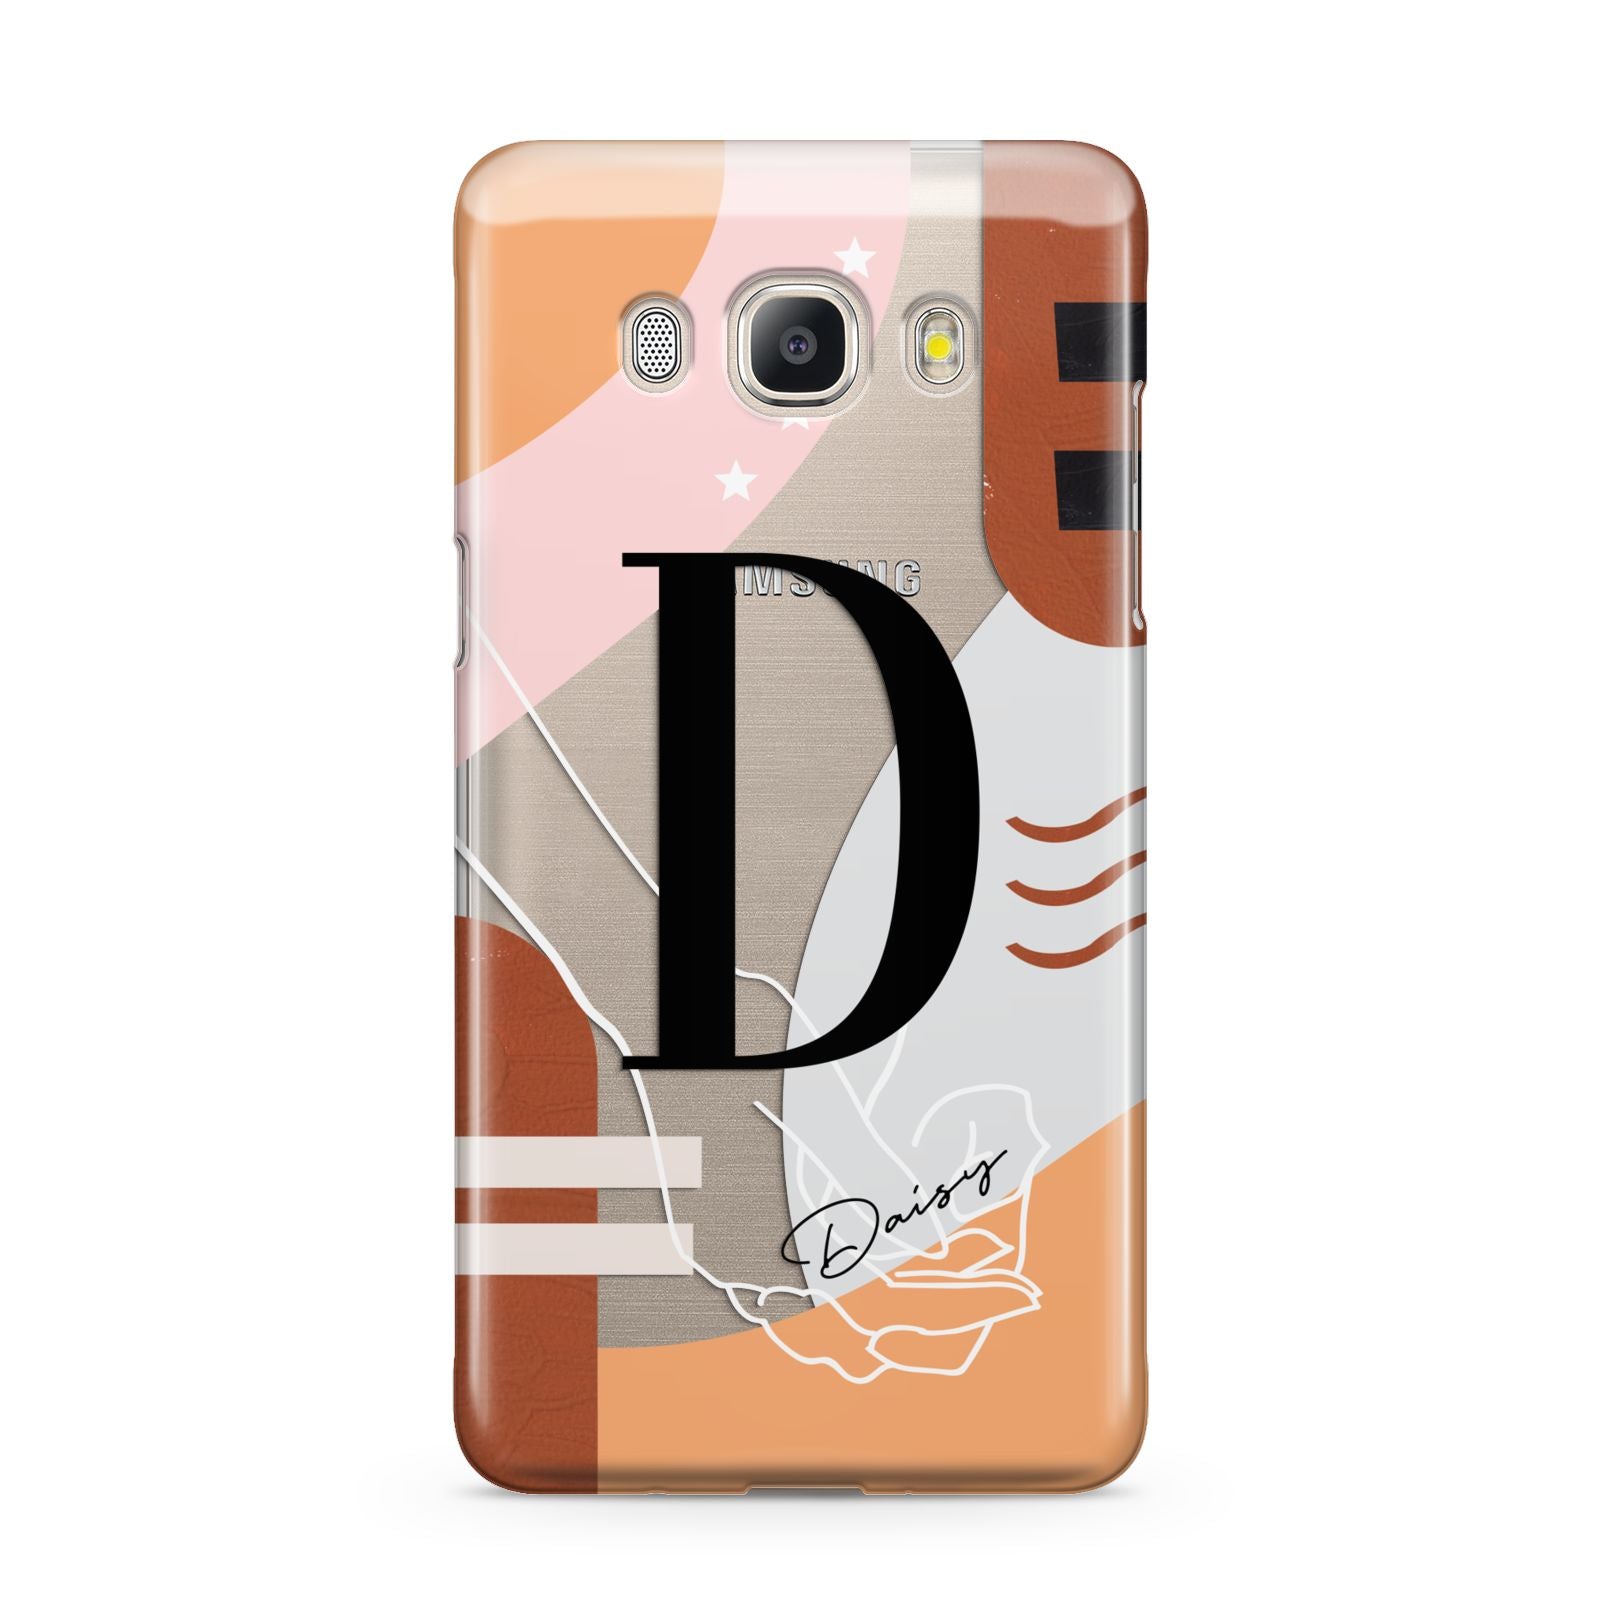 Personalised Abstract Samsung Galaxy J5 2016 Case